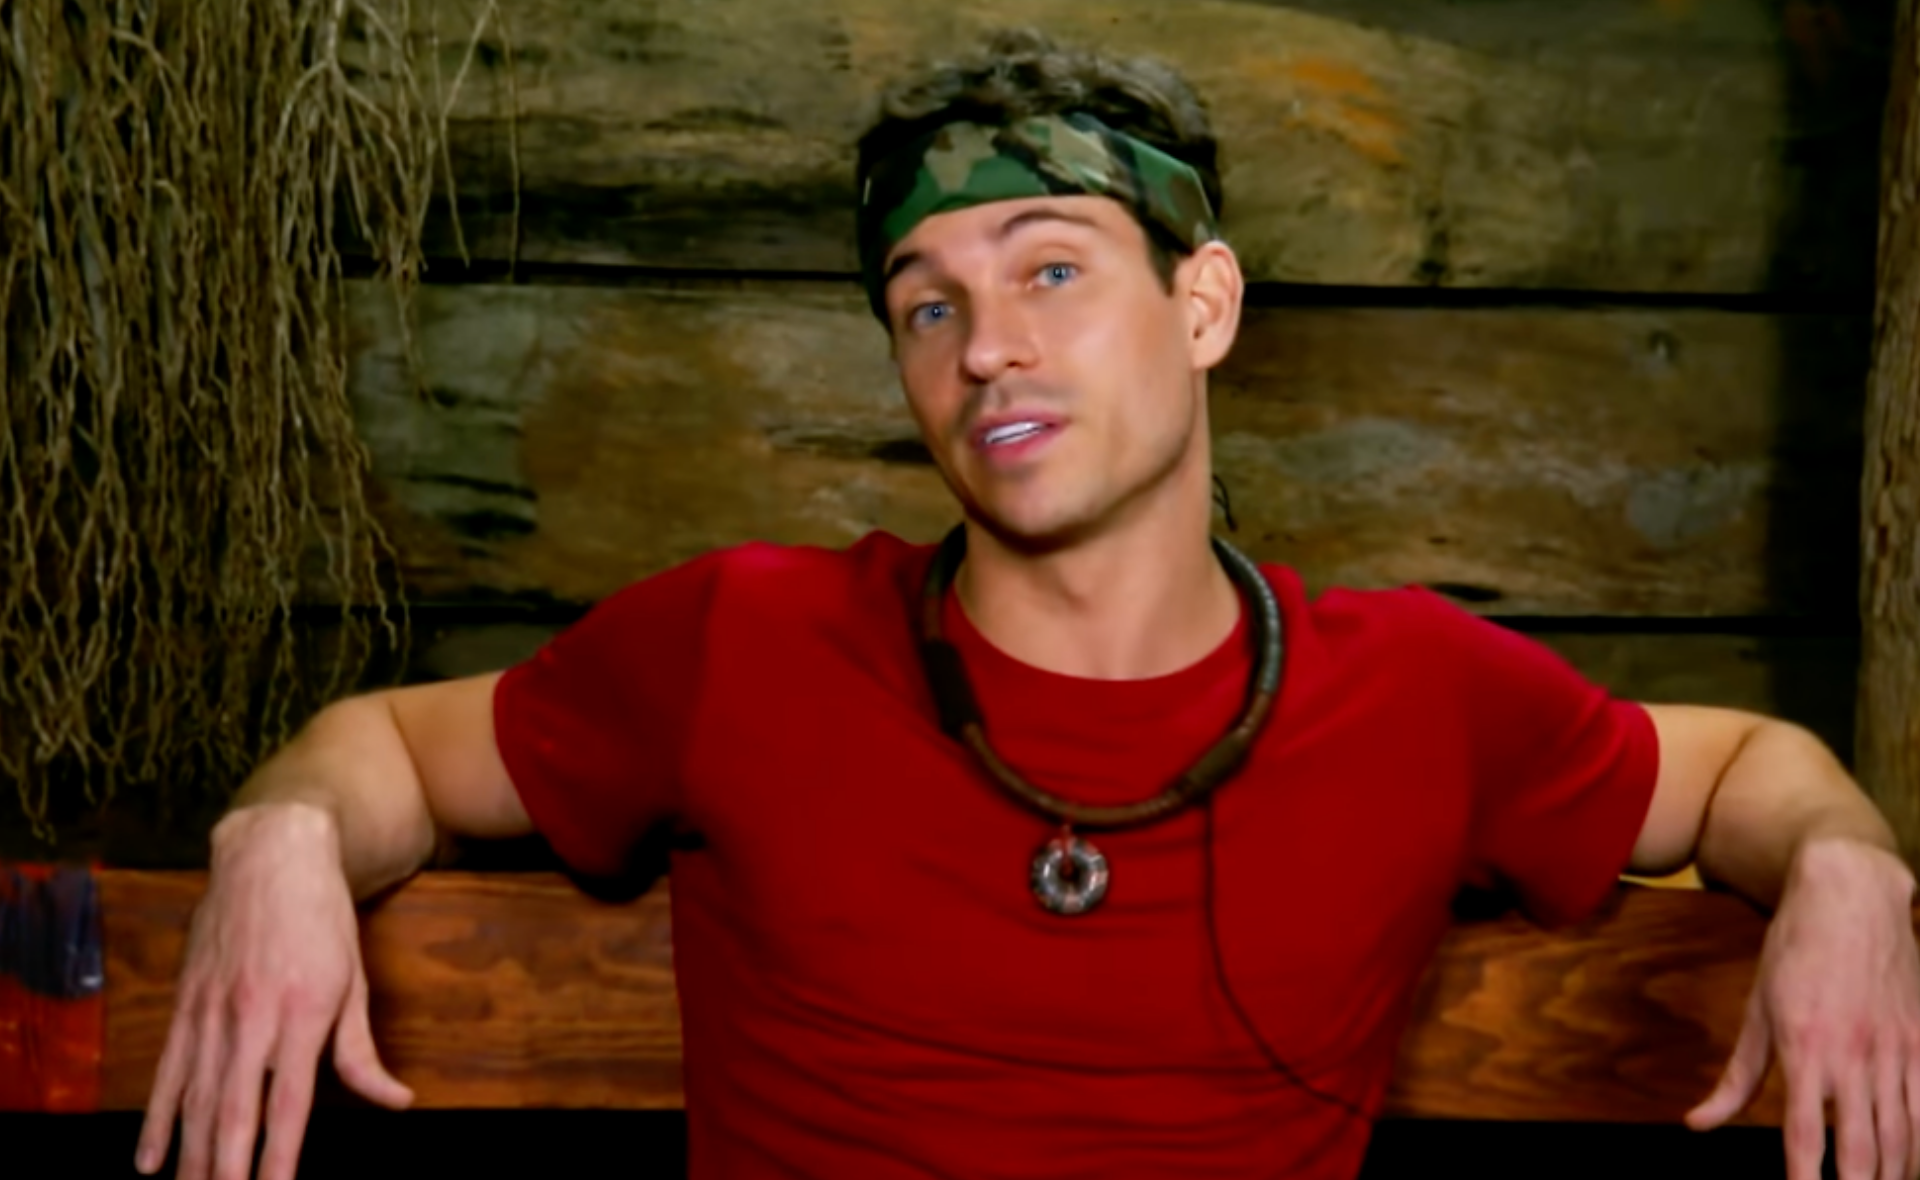 Single and ready to mingle! Joey Essex is looking for love in the I’m A Celeb jungle